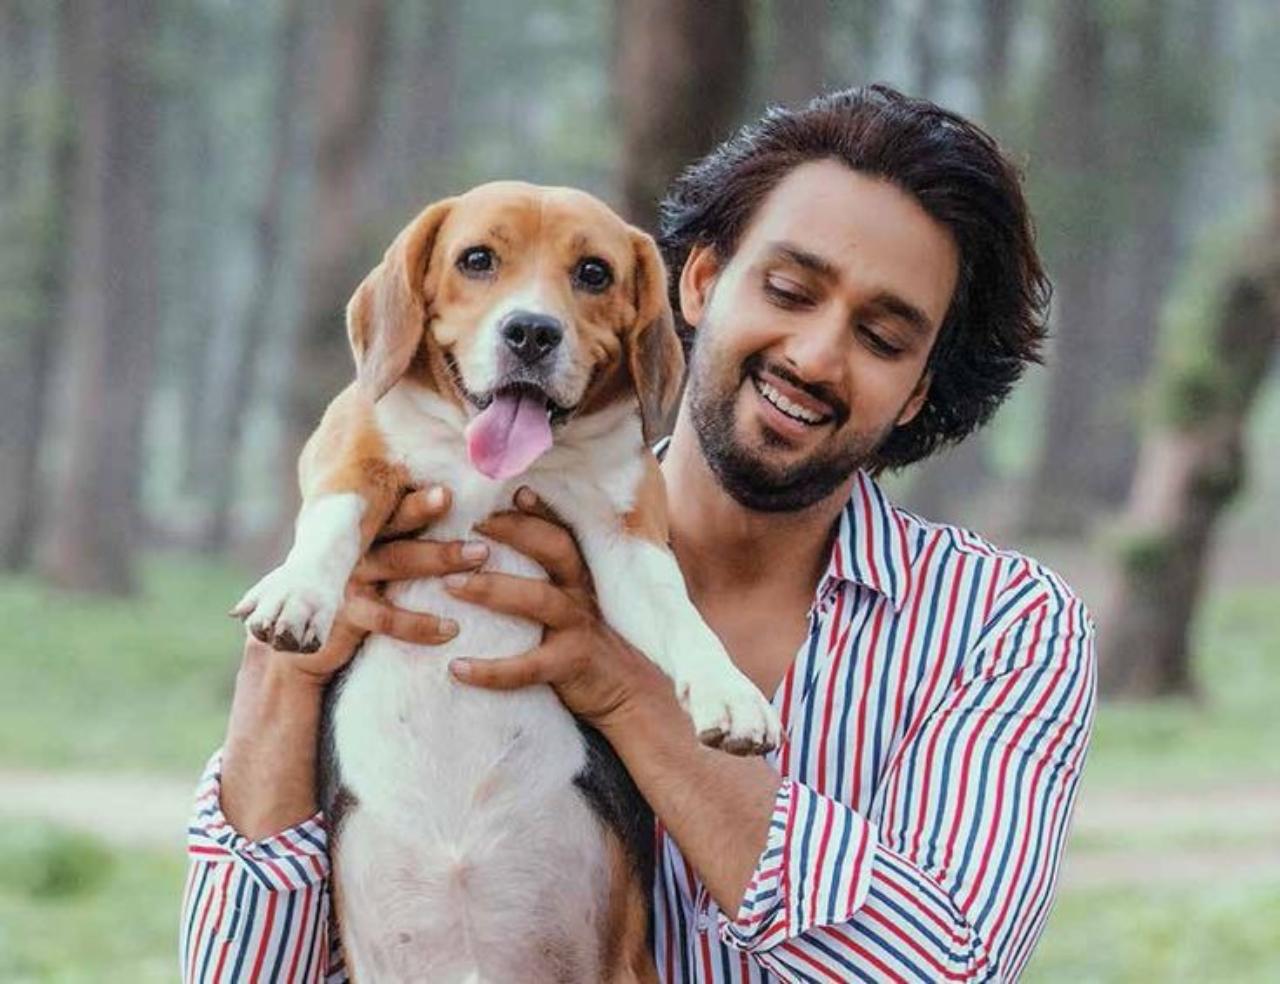 Sourabh Raaj Jain 
Sourabh's love for pets, especially dogs, has been a constant since childhood. Growing up with a furry companion and now having a special bond with his current pet, Wafer, whom he sees as his first baby, has taught him the power of unconditional love. Come on, how adorable is that Beagle smile?